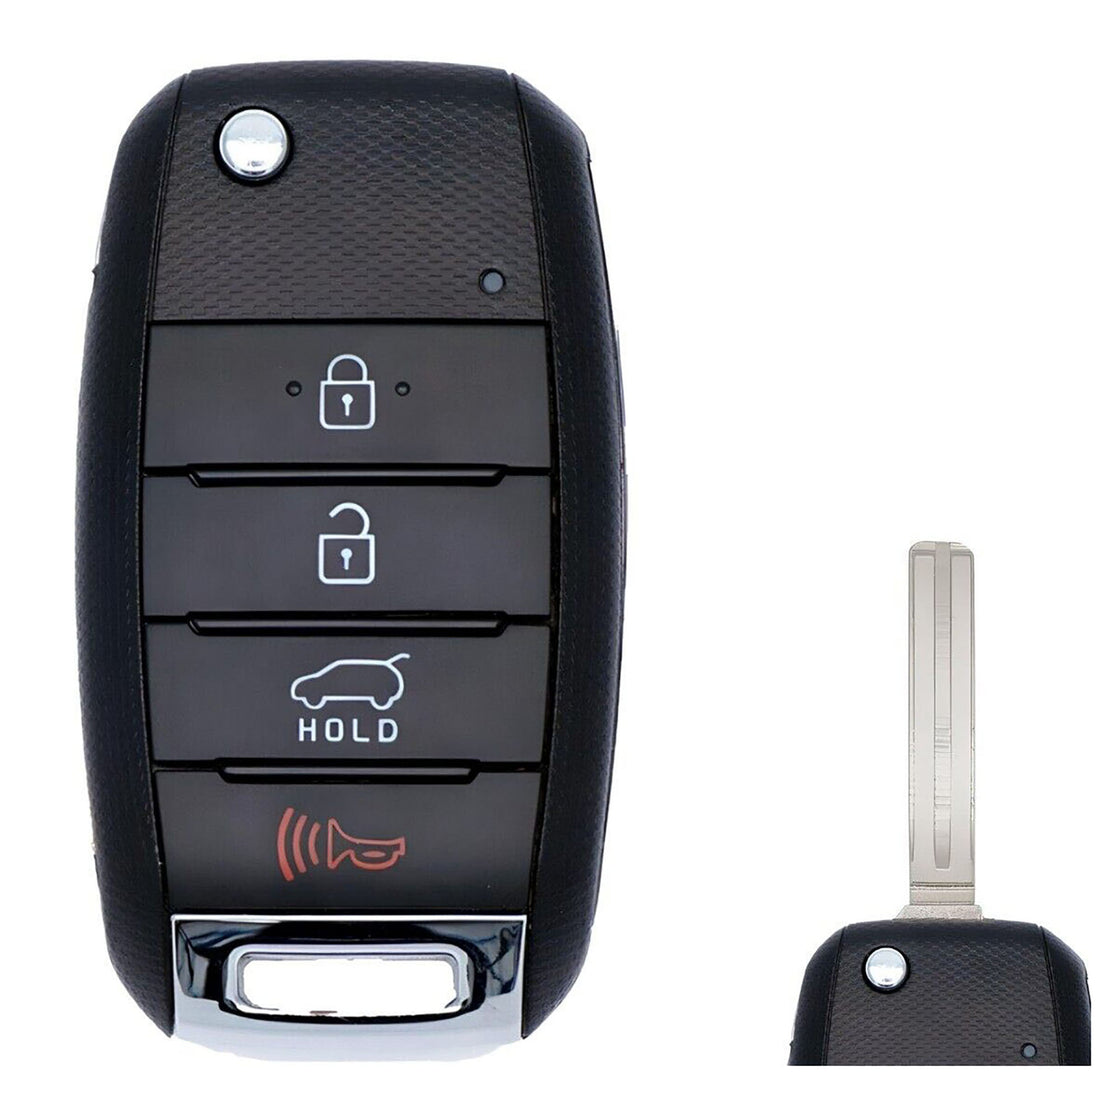 1x New Replacement Key Fob Remote Compatible with & Fit For 2014-2015 Kia Sportage - NYODD4TX1306-TFL - MPN NYODD4TX1306-TFL-02